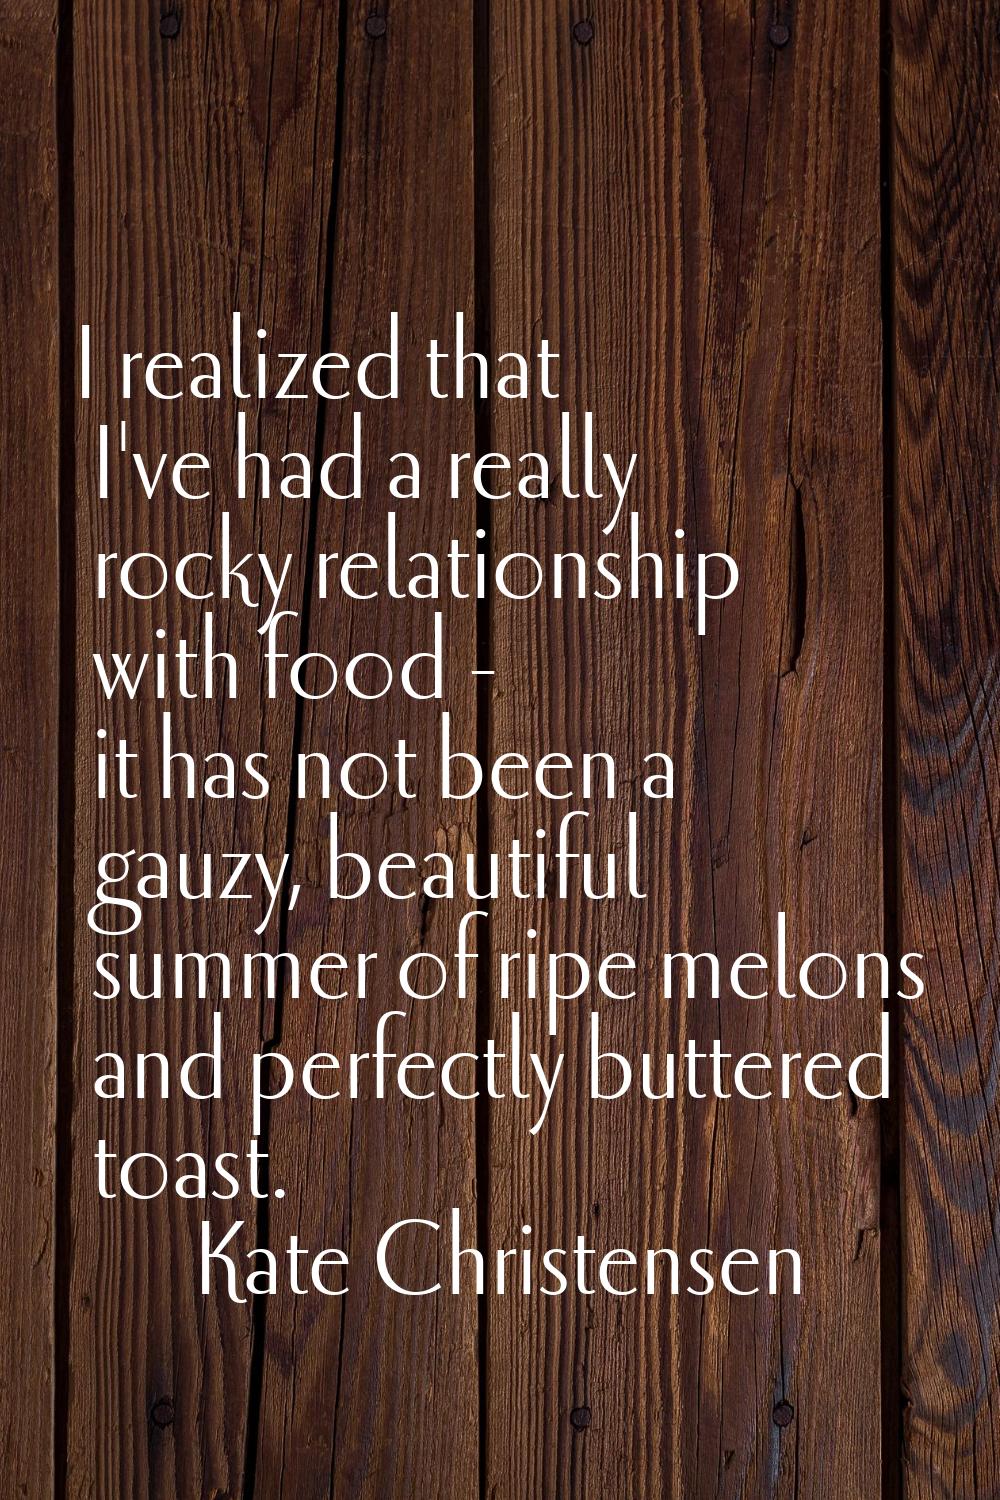 I realized that I've had a really rocky relationship with food - it has not been a gauzy, beautiful